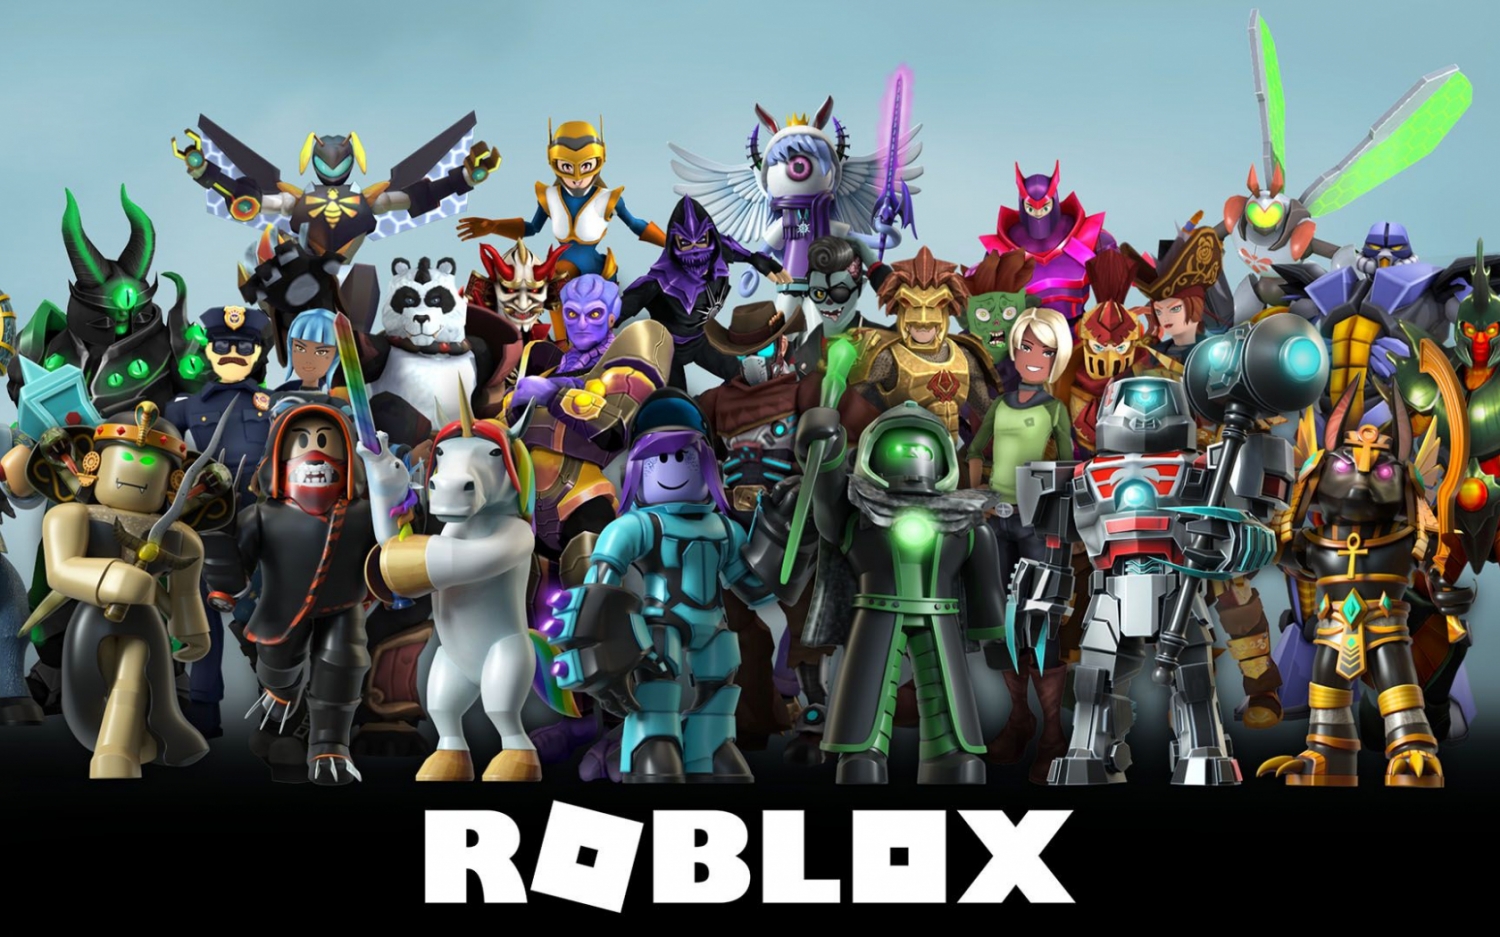 Roblox Gears Up For Significant Expansion As Q1 Revenues Daus Soar Tweaktown - roblox games with gears